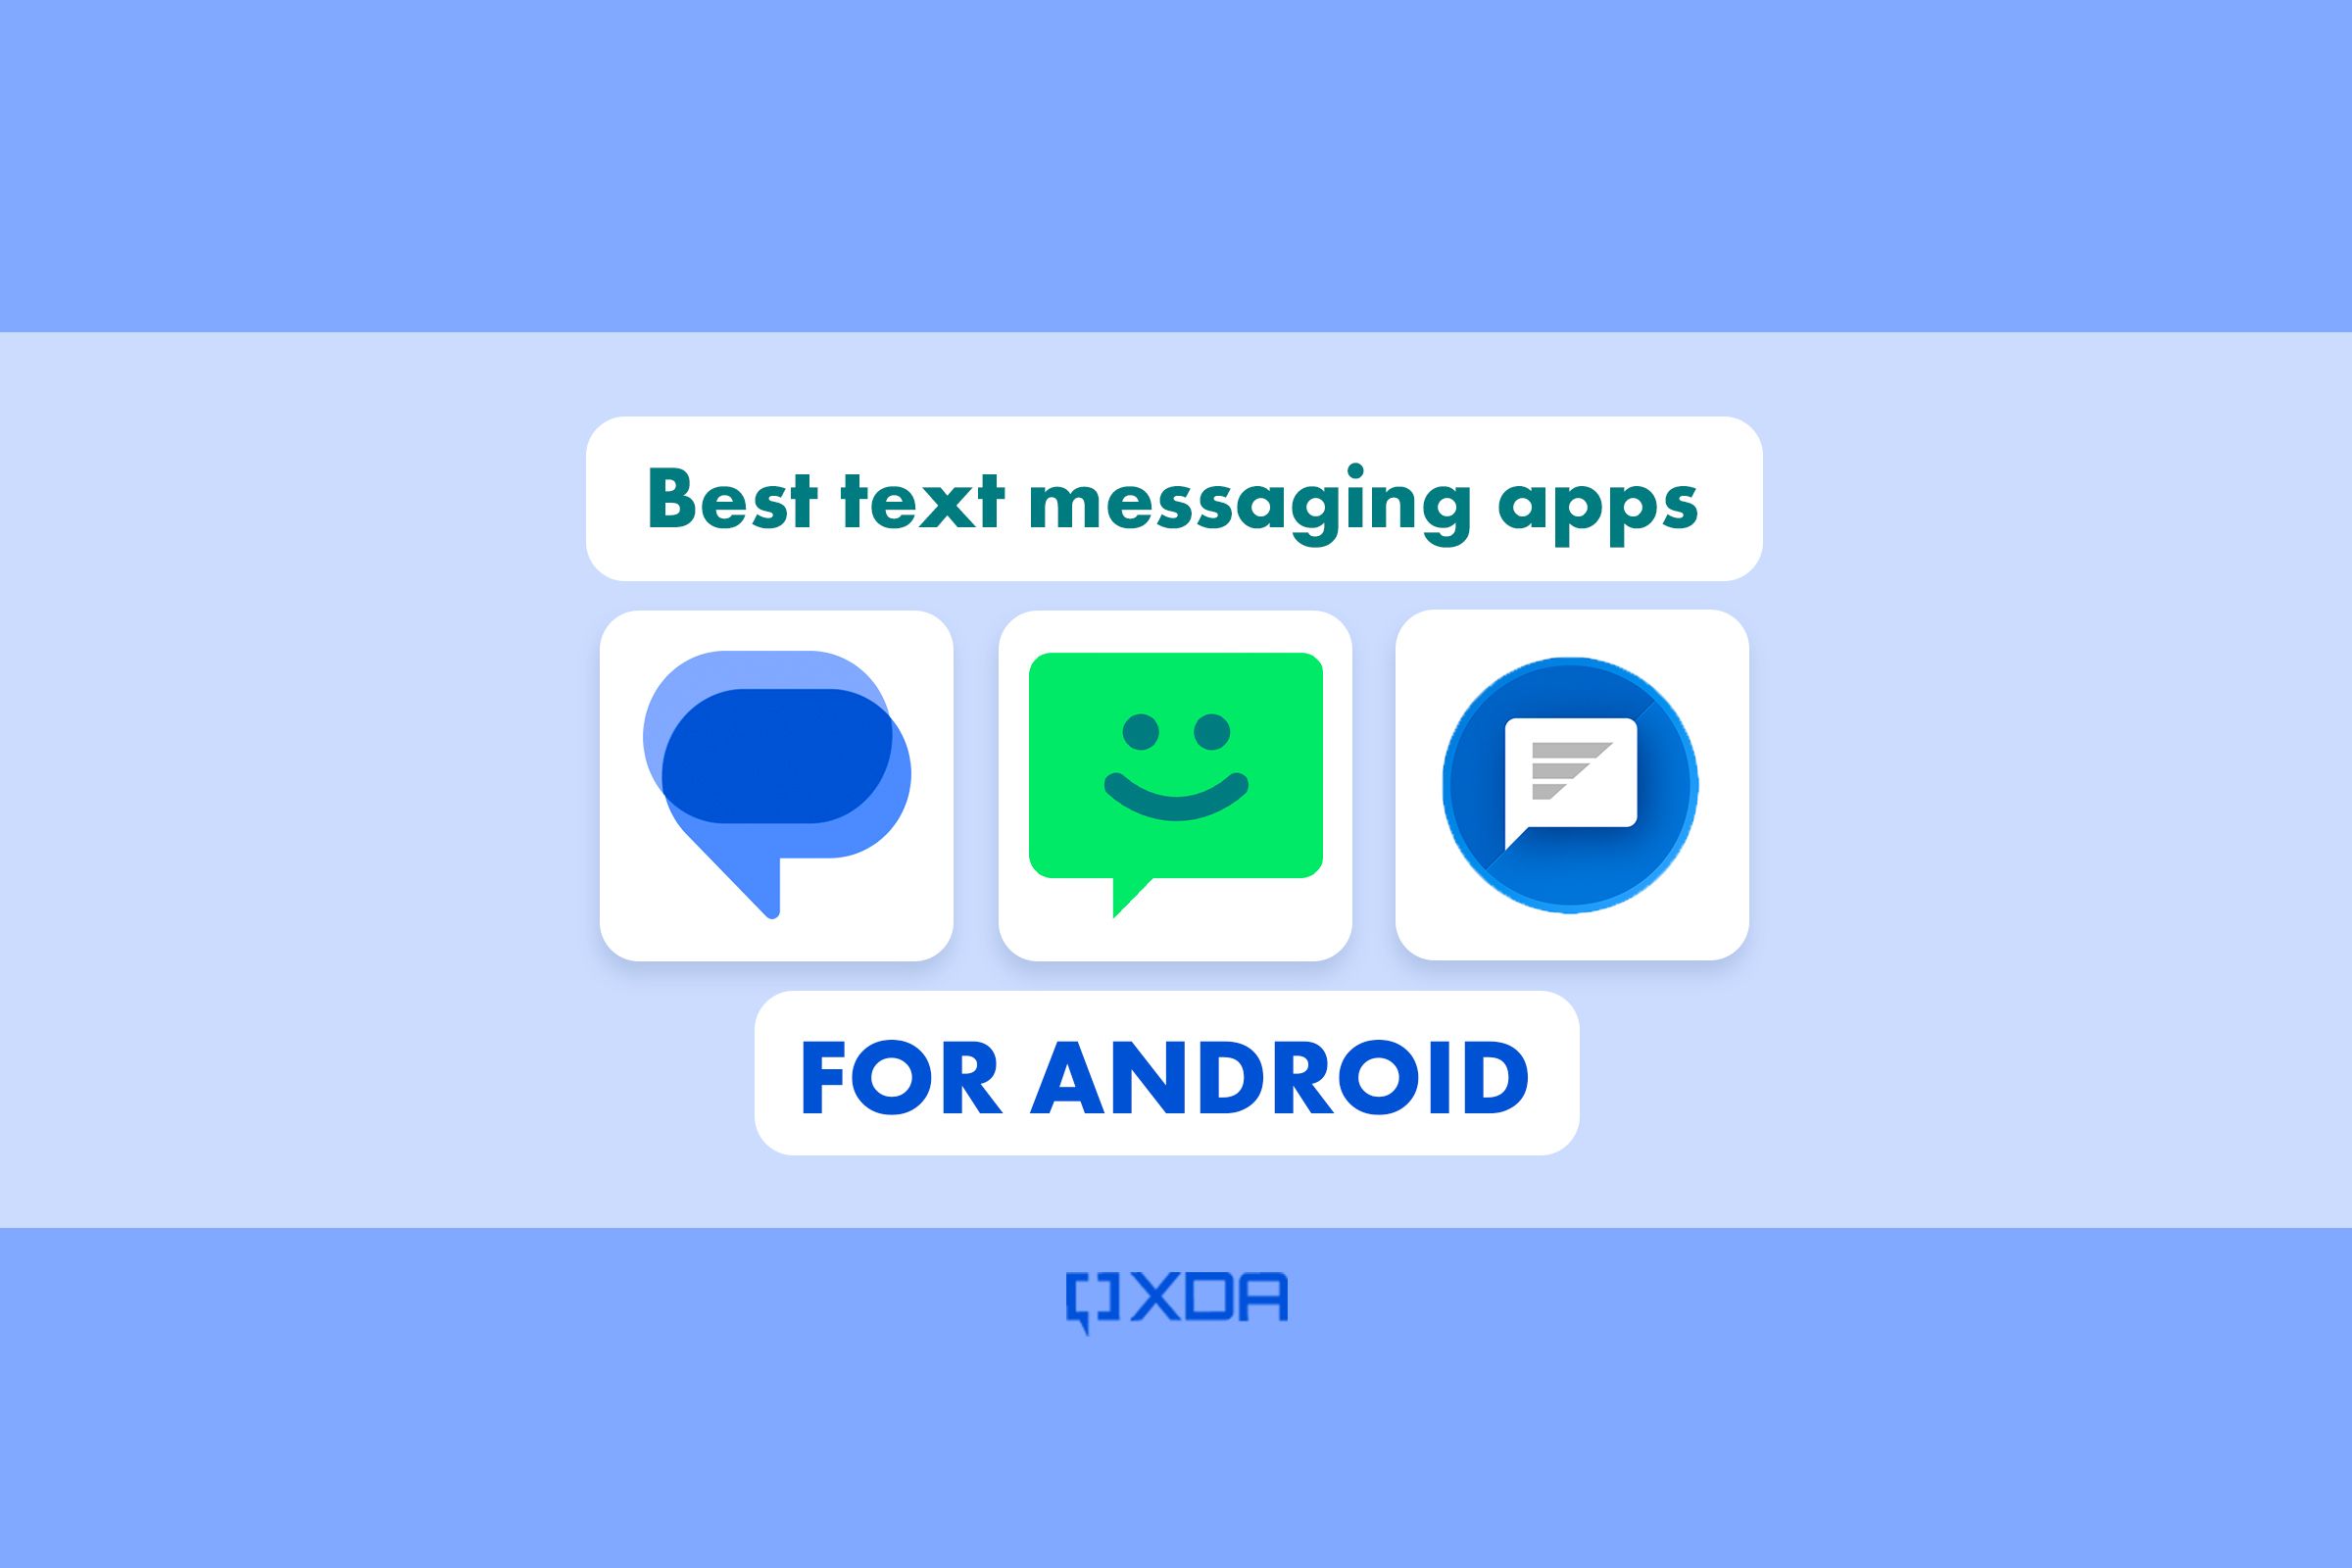 Best text messaging apps for Android